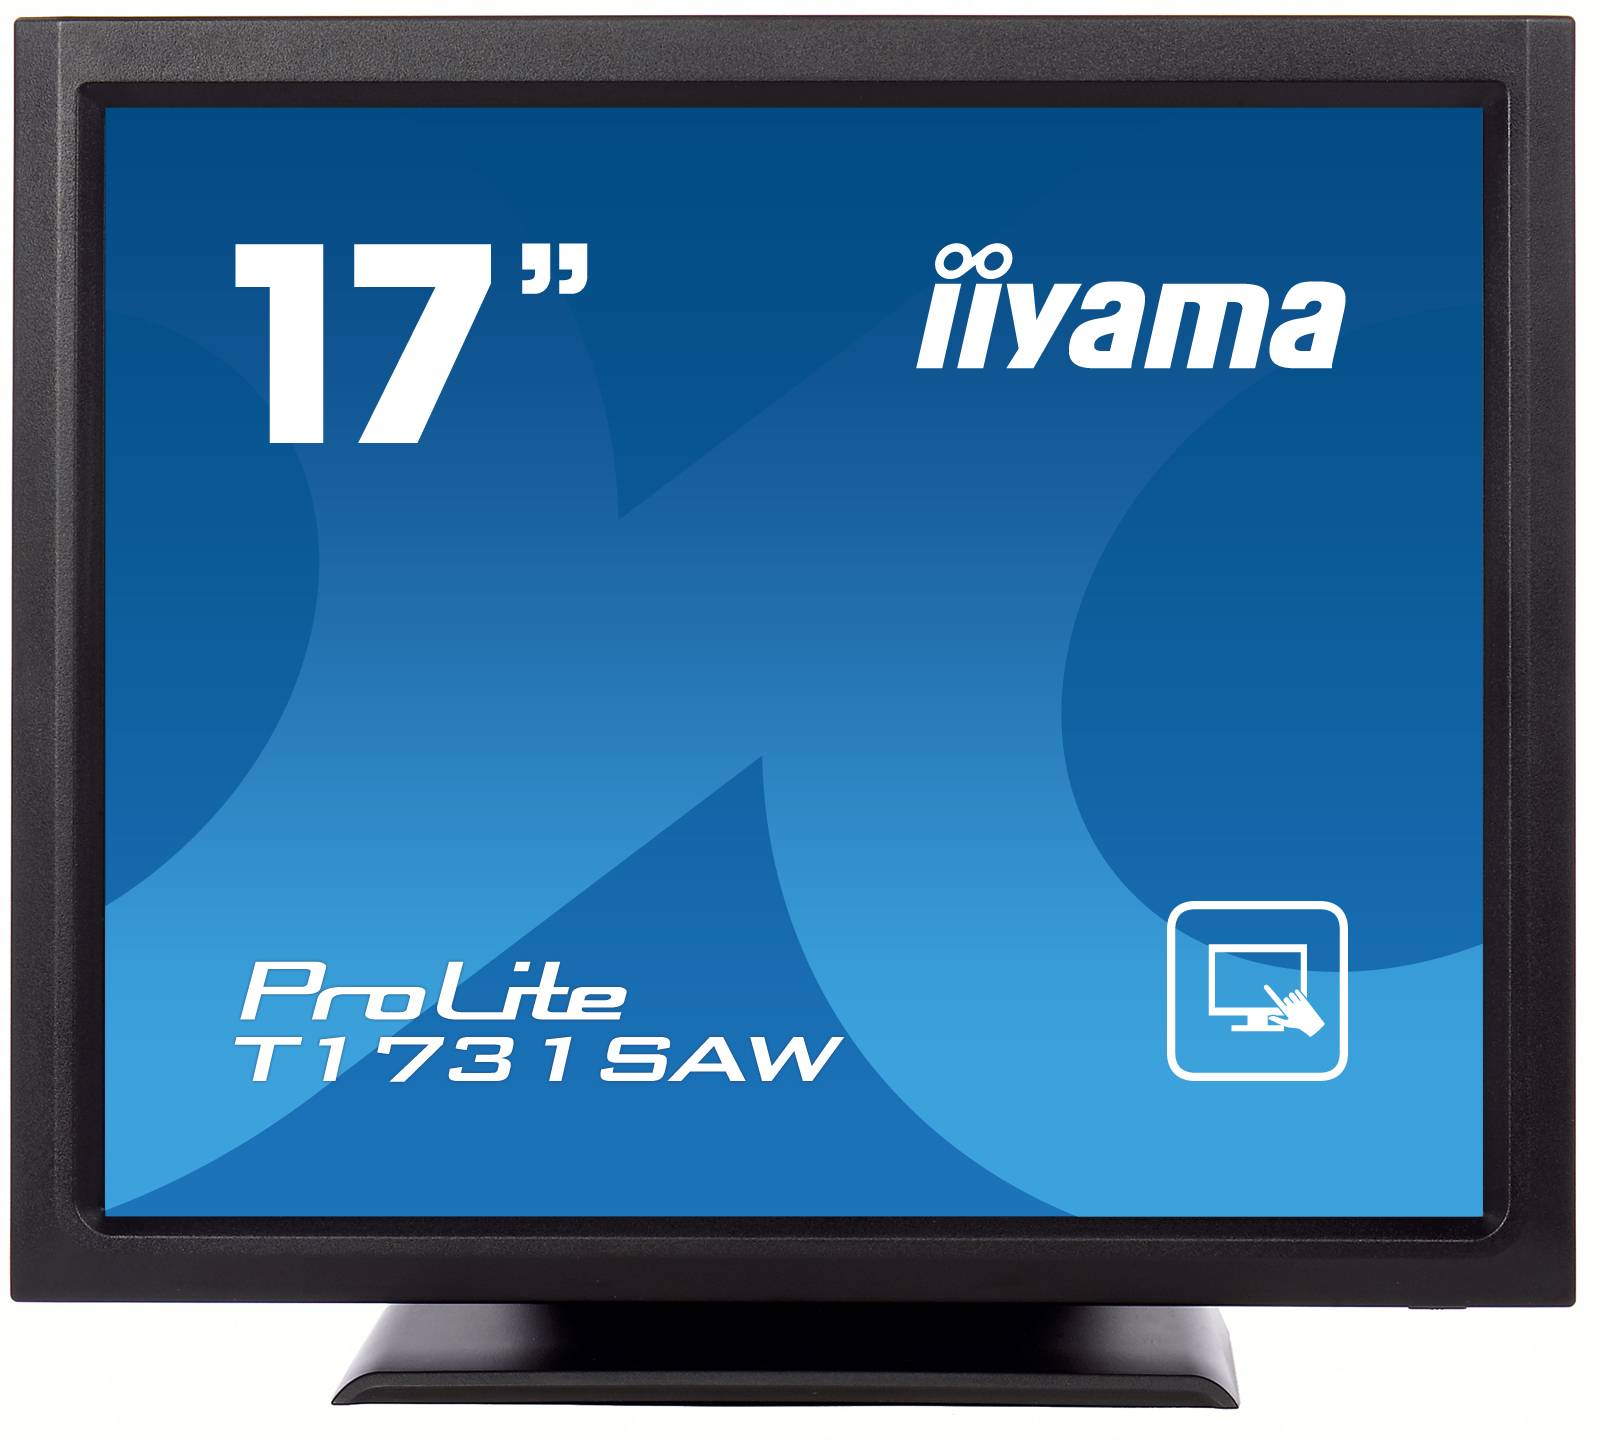 Rca Informatique - Image du produit : 17IN LCD 1280X1024 16:9 1000:1 5MS RS232 AND USB